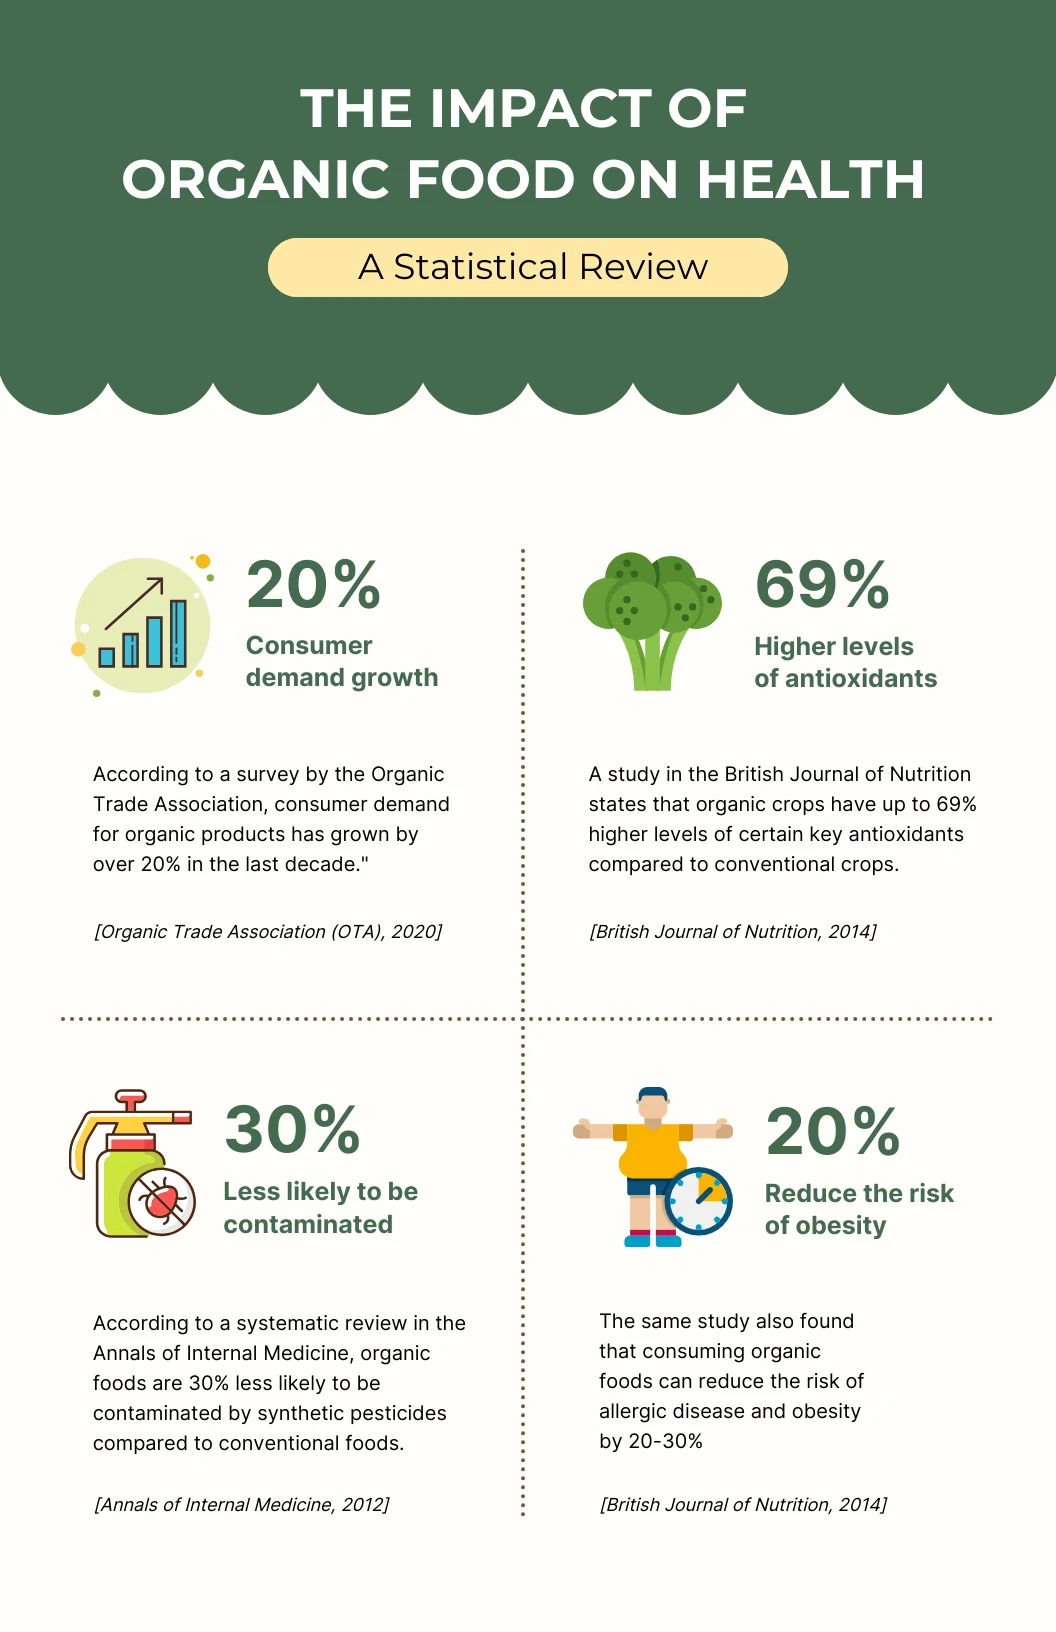 The positive impact of organic foods